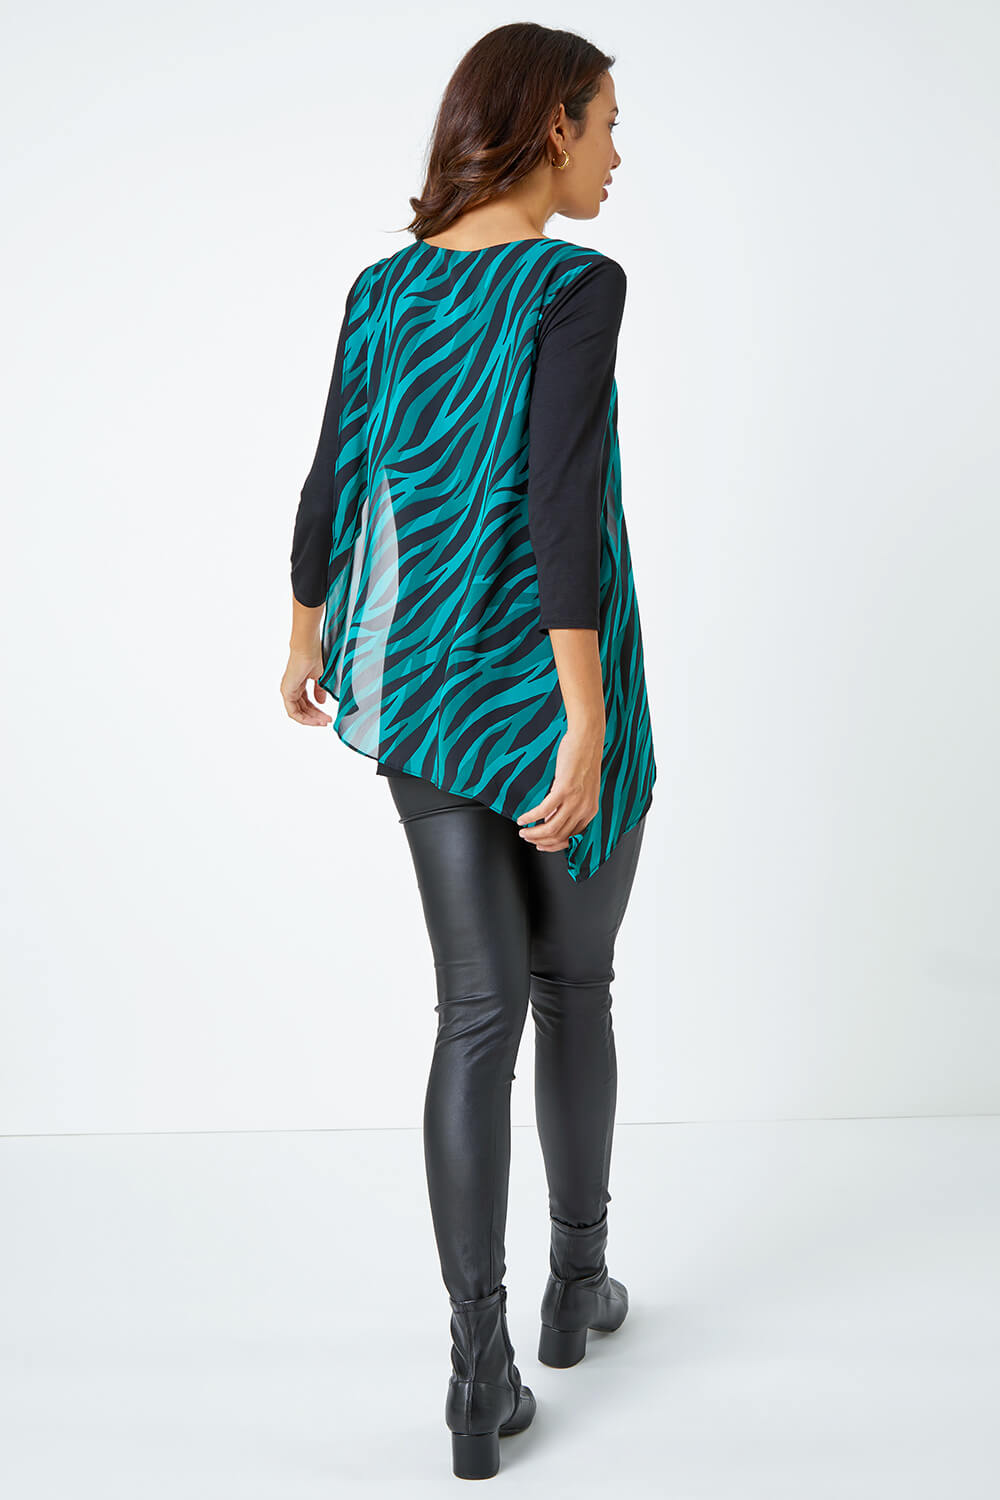 Green Abstract Print Overlay Tunic Top , Image 3 of 5